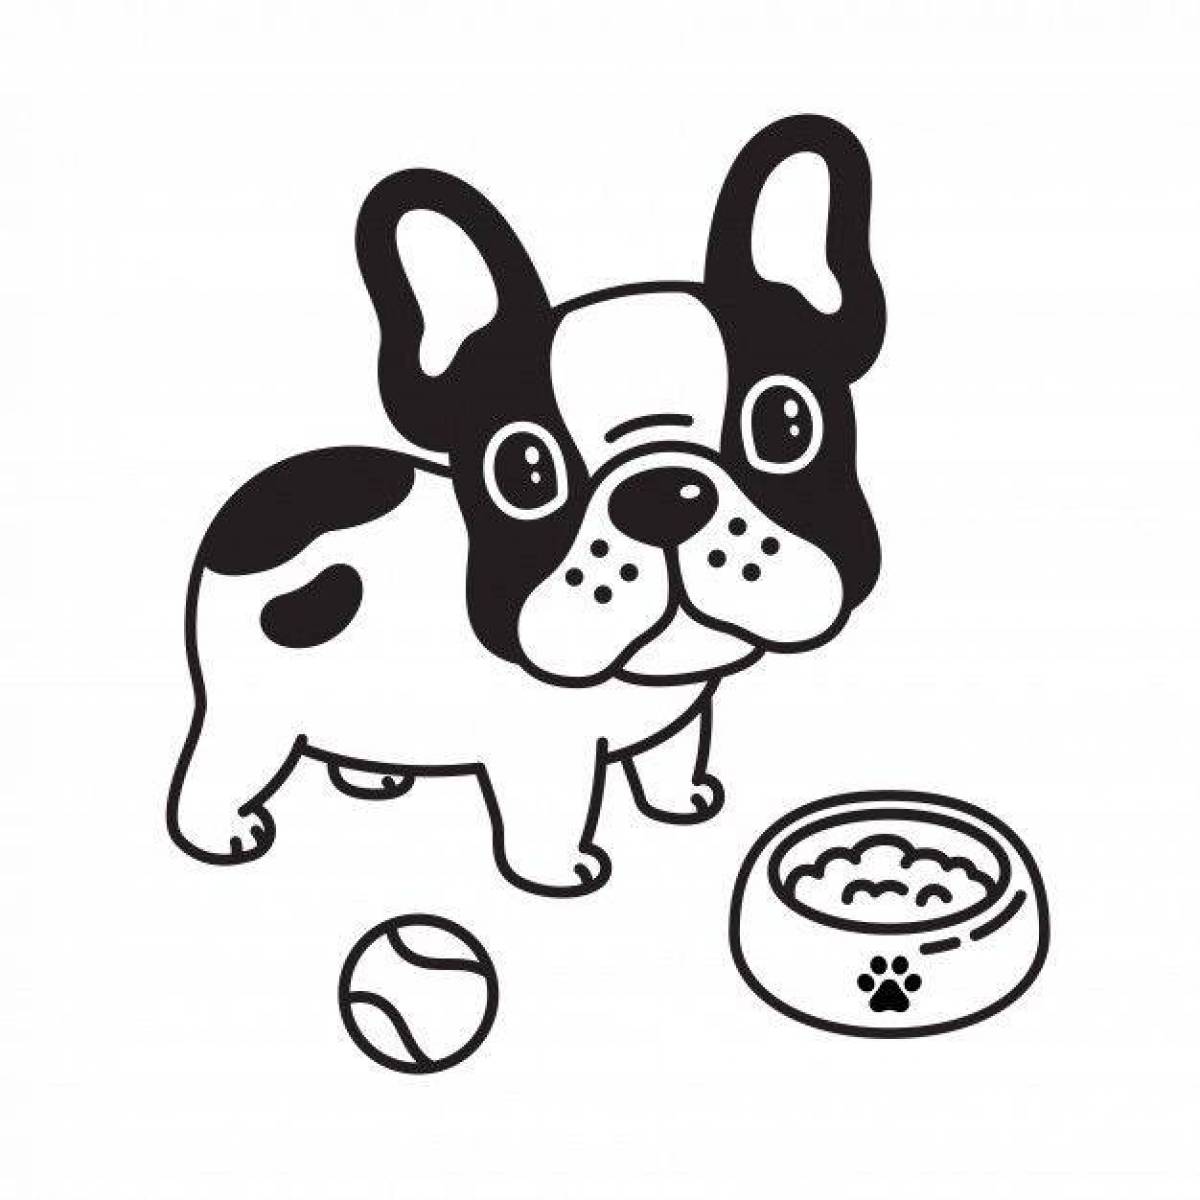 Coloring page energetic french bulldog